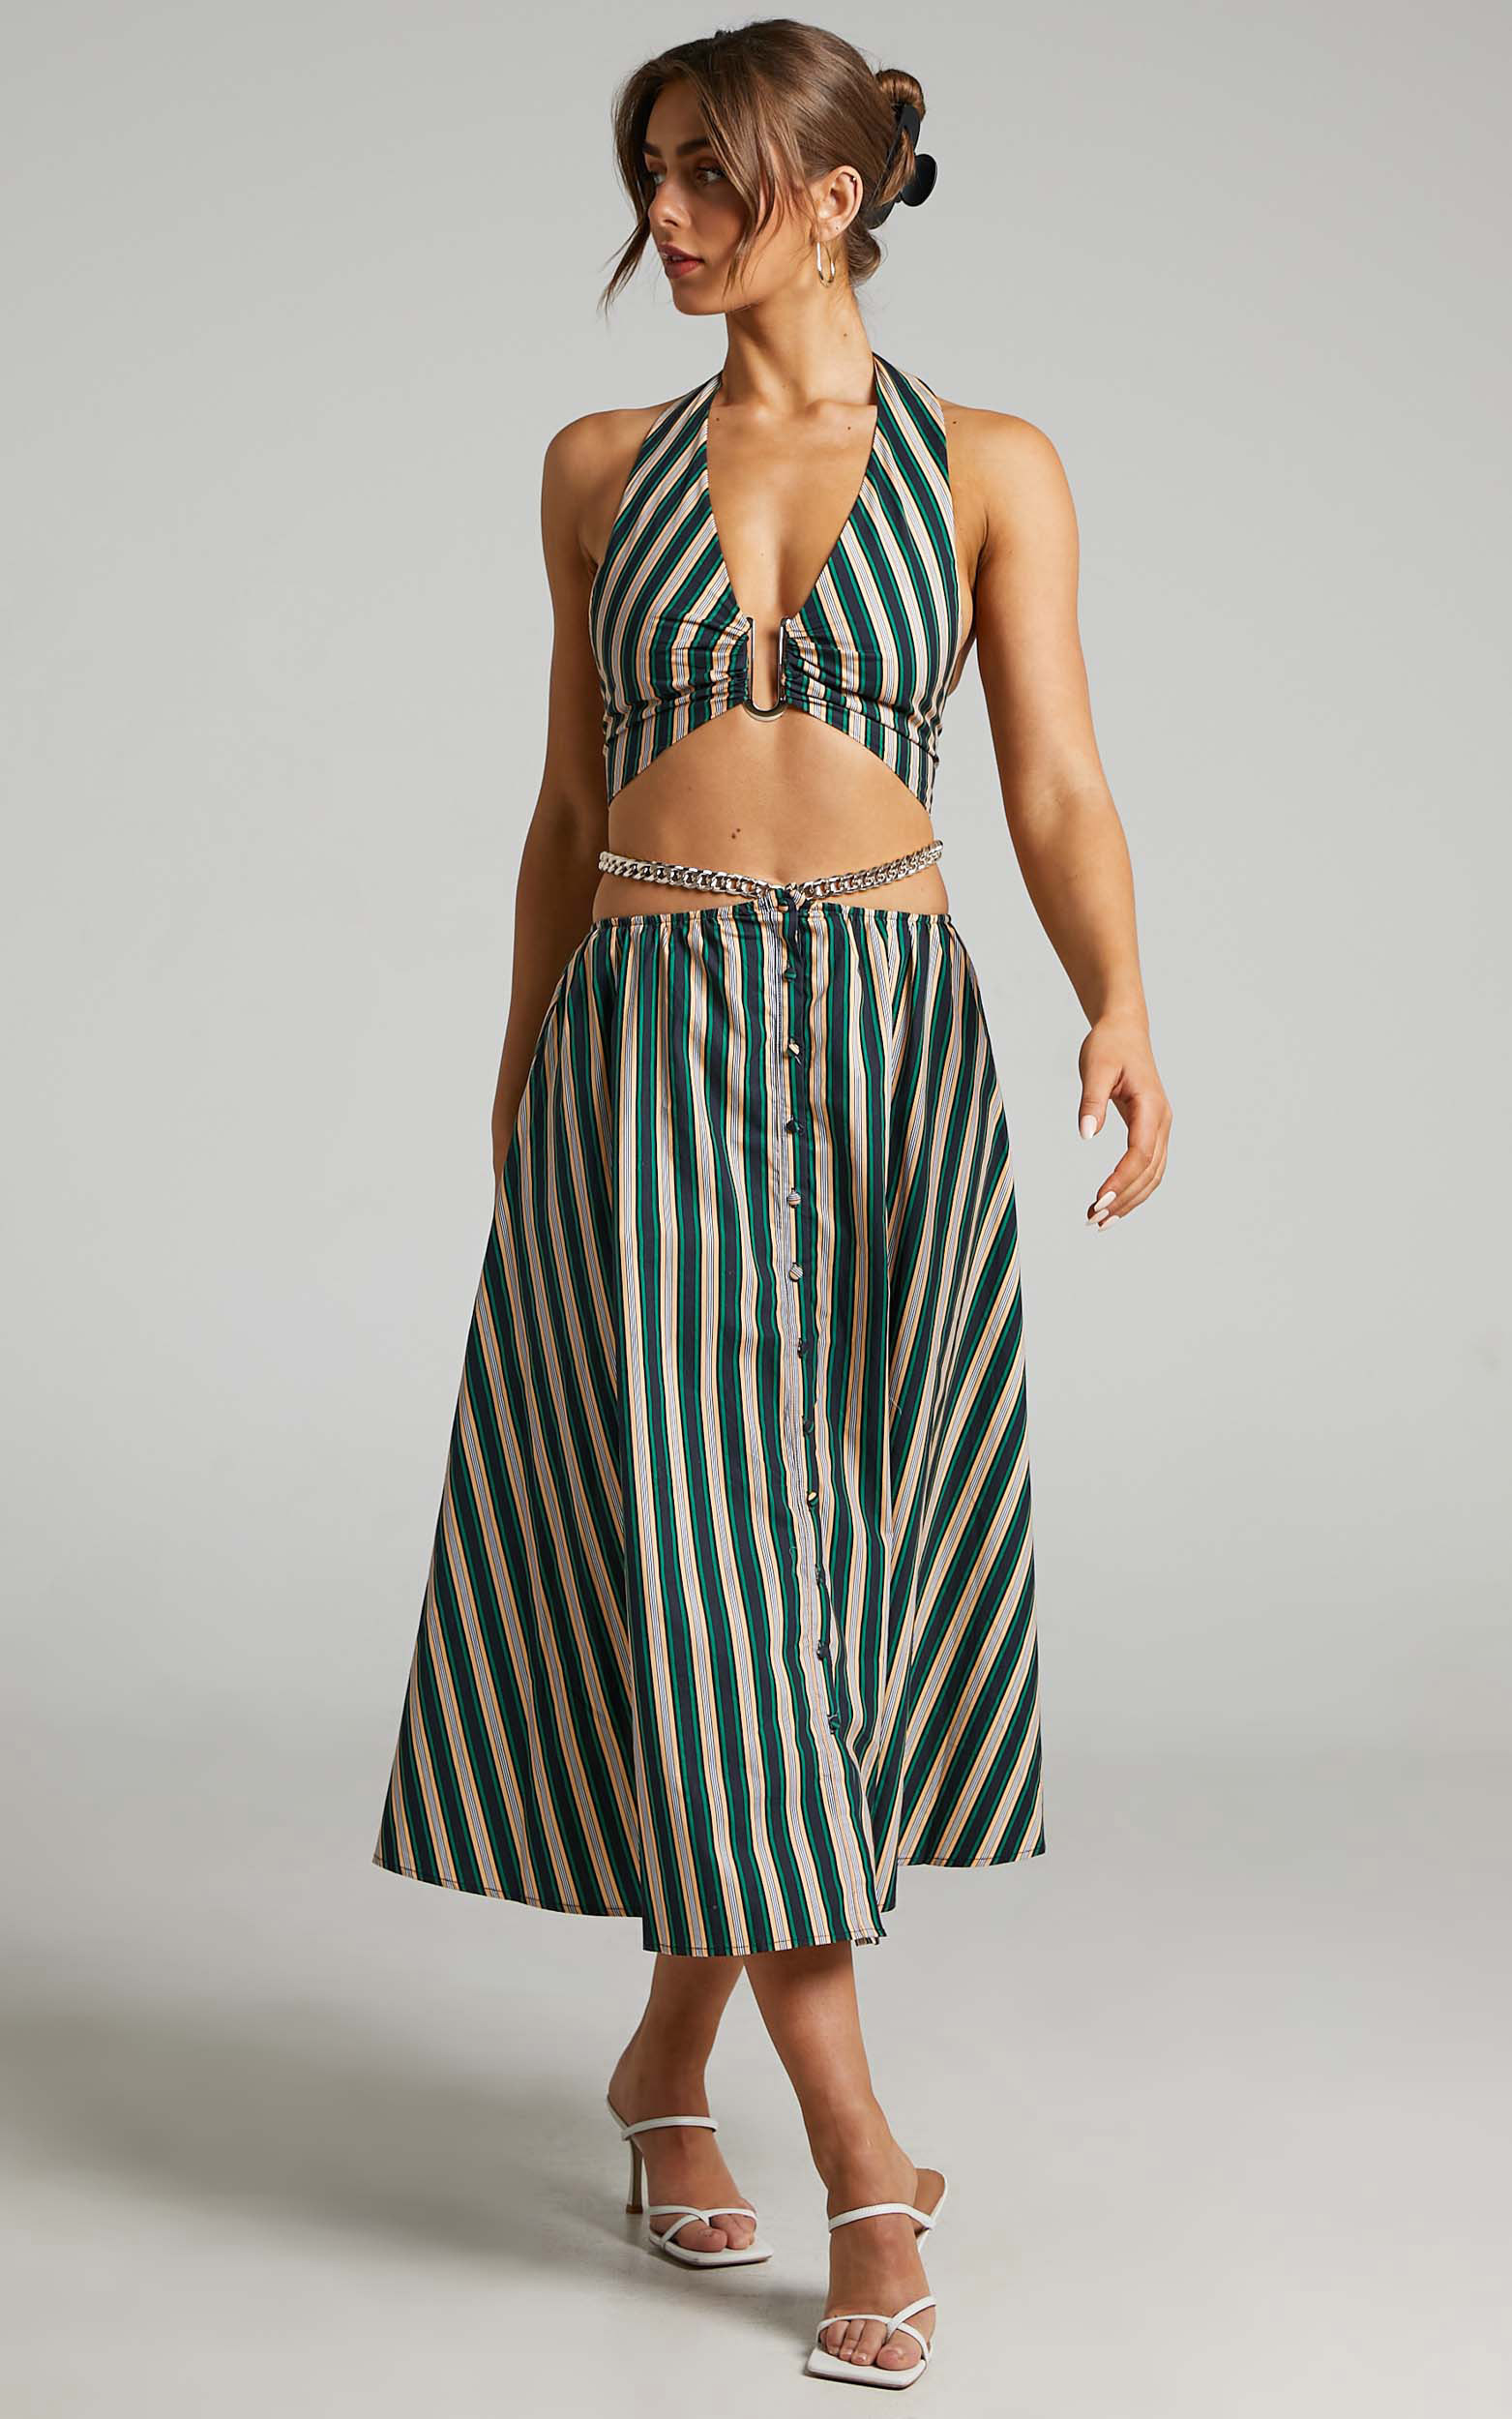 ATOIR - THE GRAVITY SKIRT in IVY PEACH STRIPE - 06, GRN1, hi-res image number null